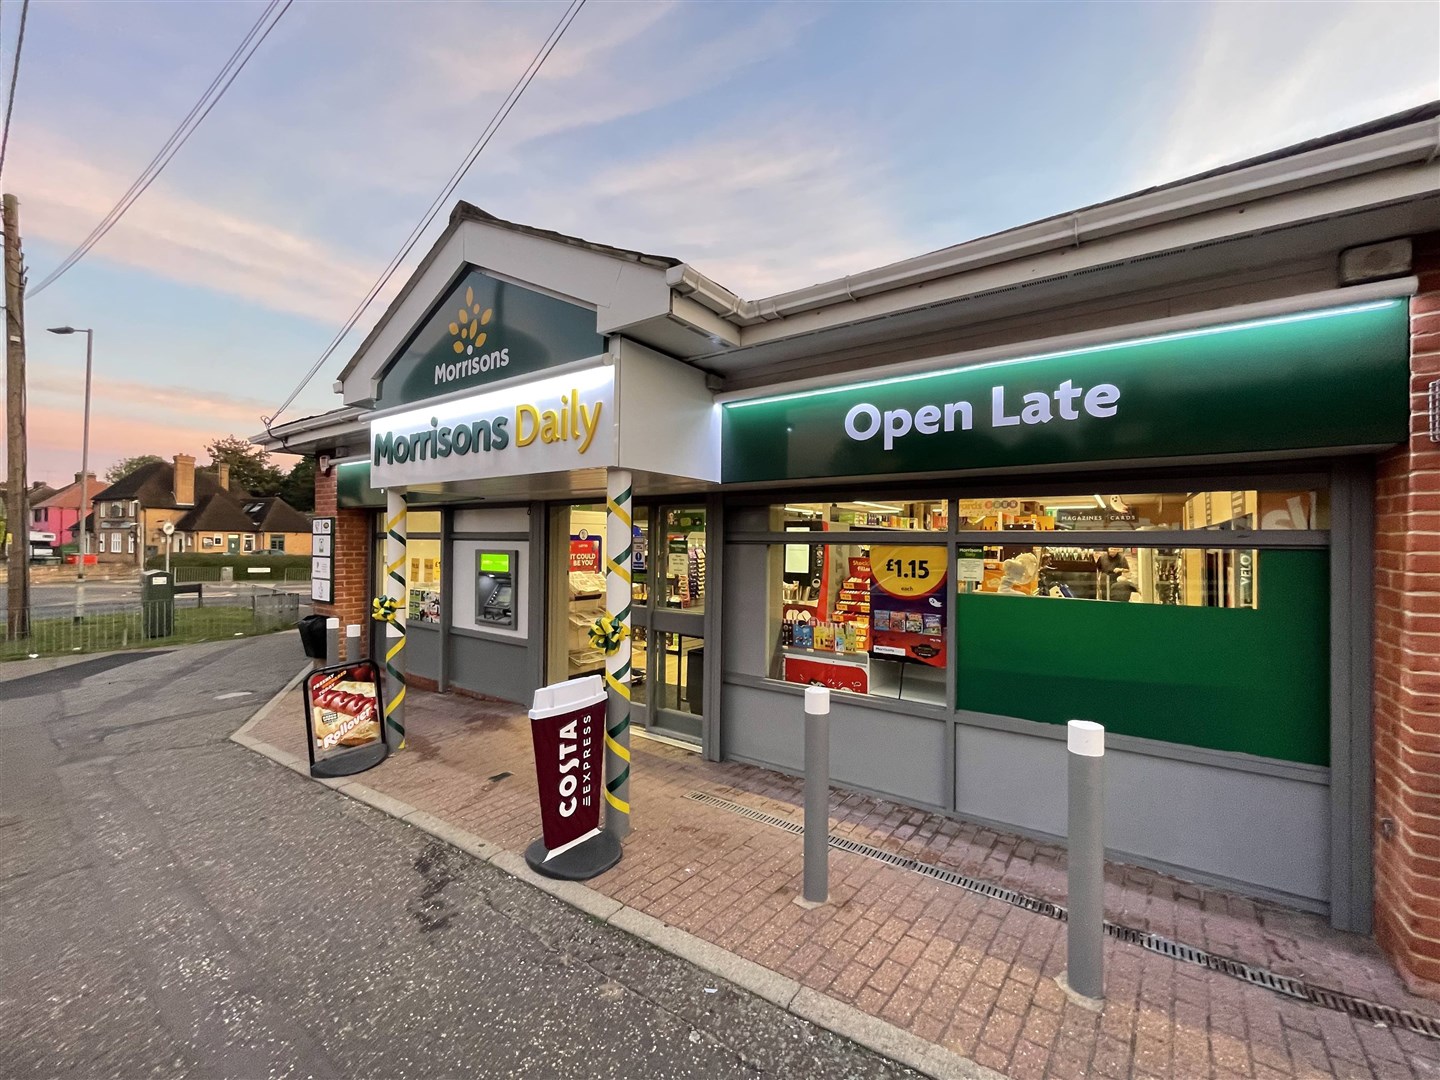 Morrisons said it has converted about 500 McColl’s stores and brought down prices by 12% (Morrisons/PA)